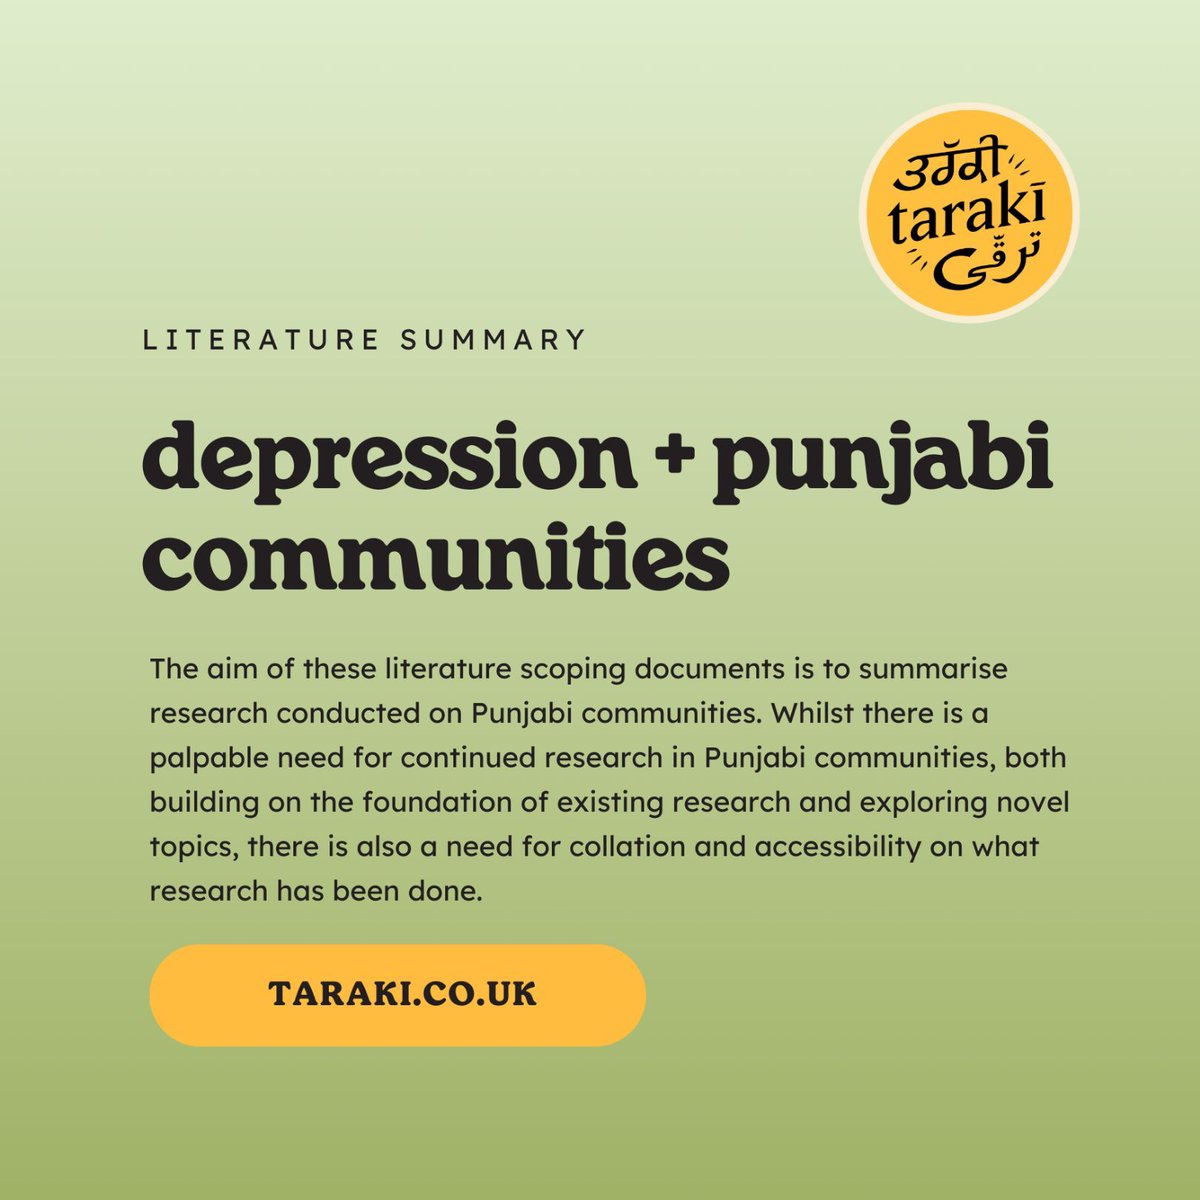 check out our newest report! a literature summary focusing on depression + punjabi communities, authored by our research officer, gurmukh singh. to access the full report, follow the link below! taraki.co.uk/knowledge-hub/… ☀️